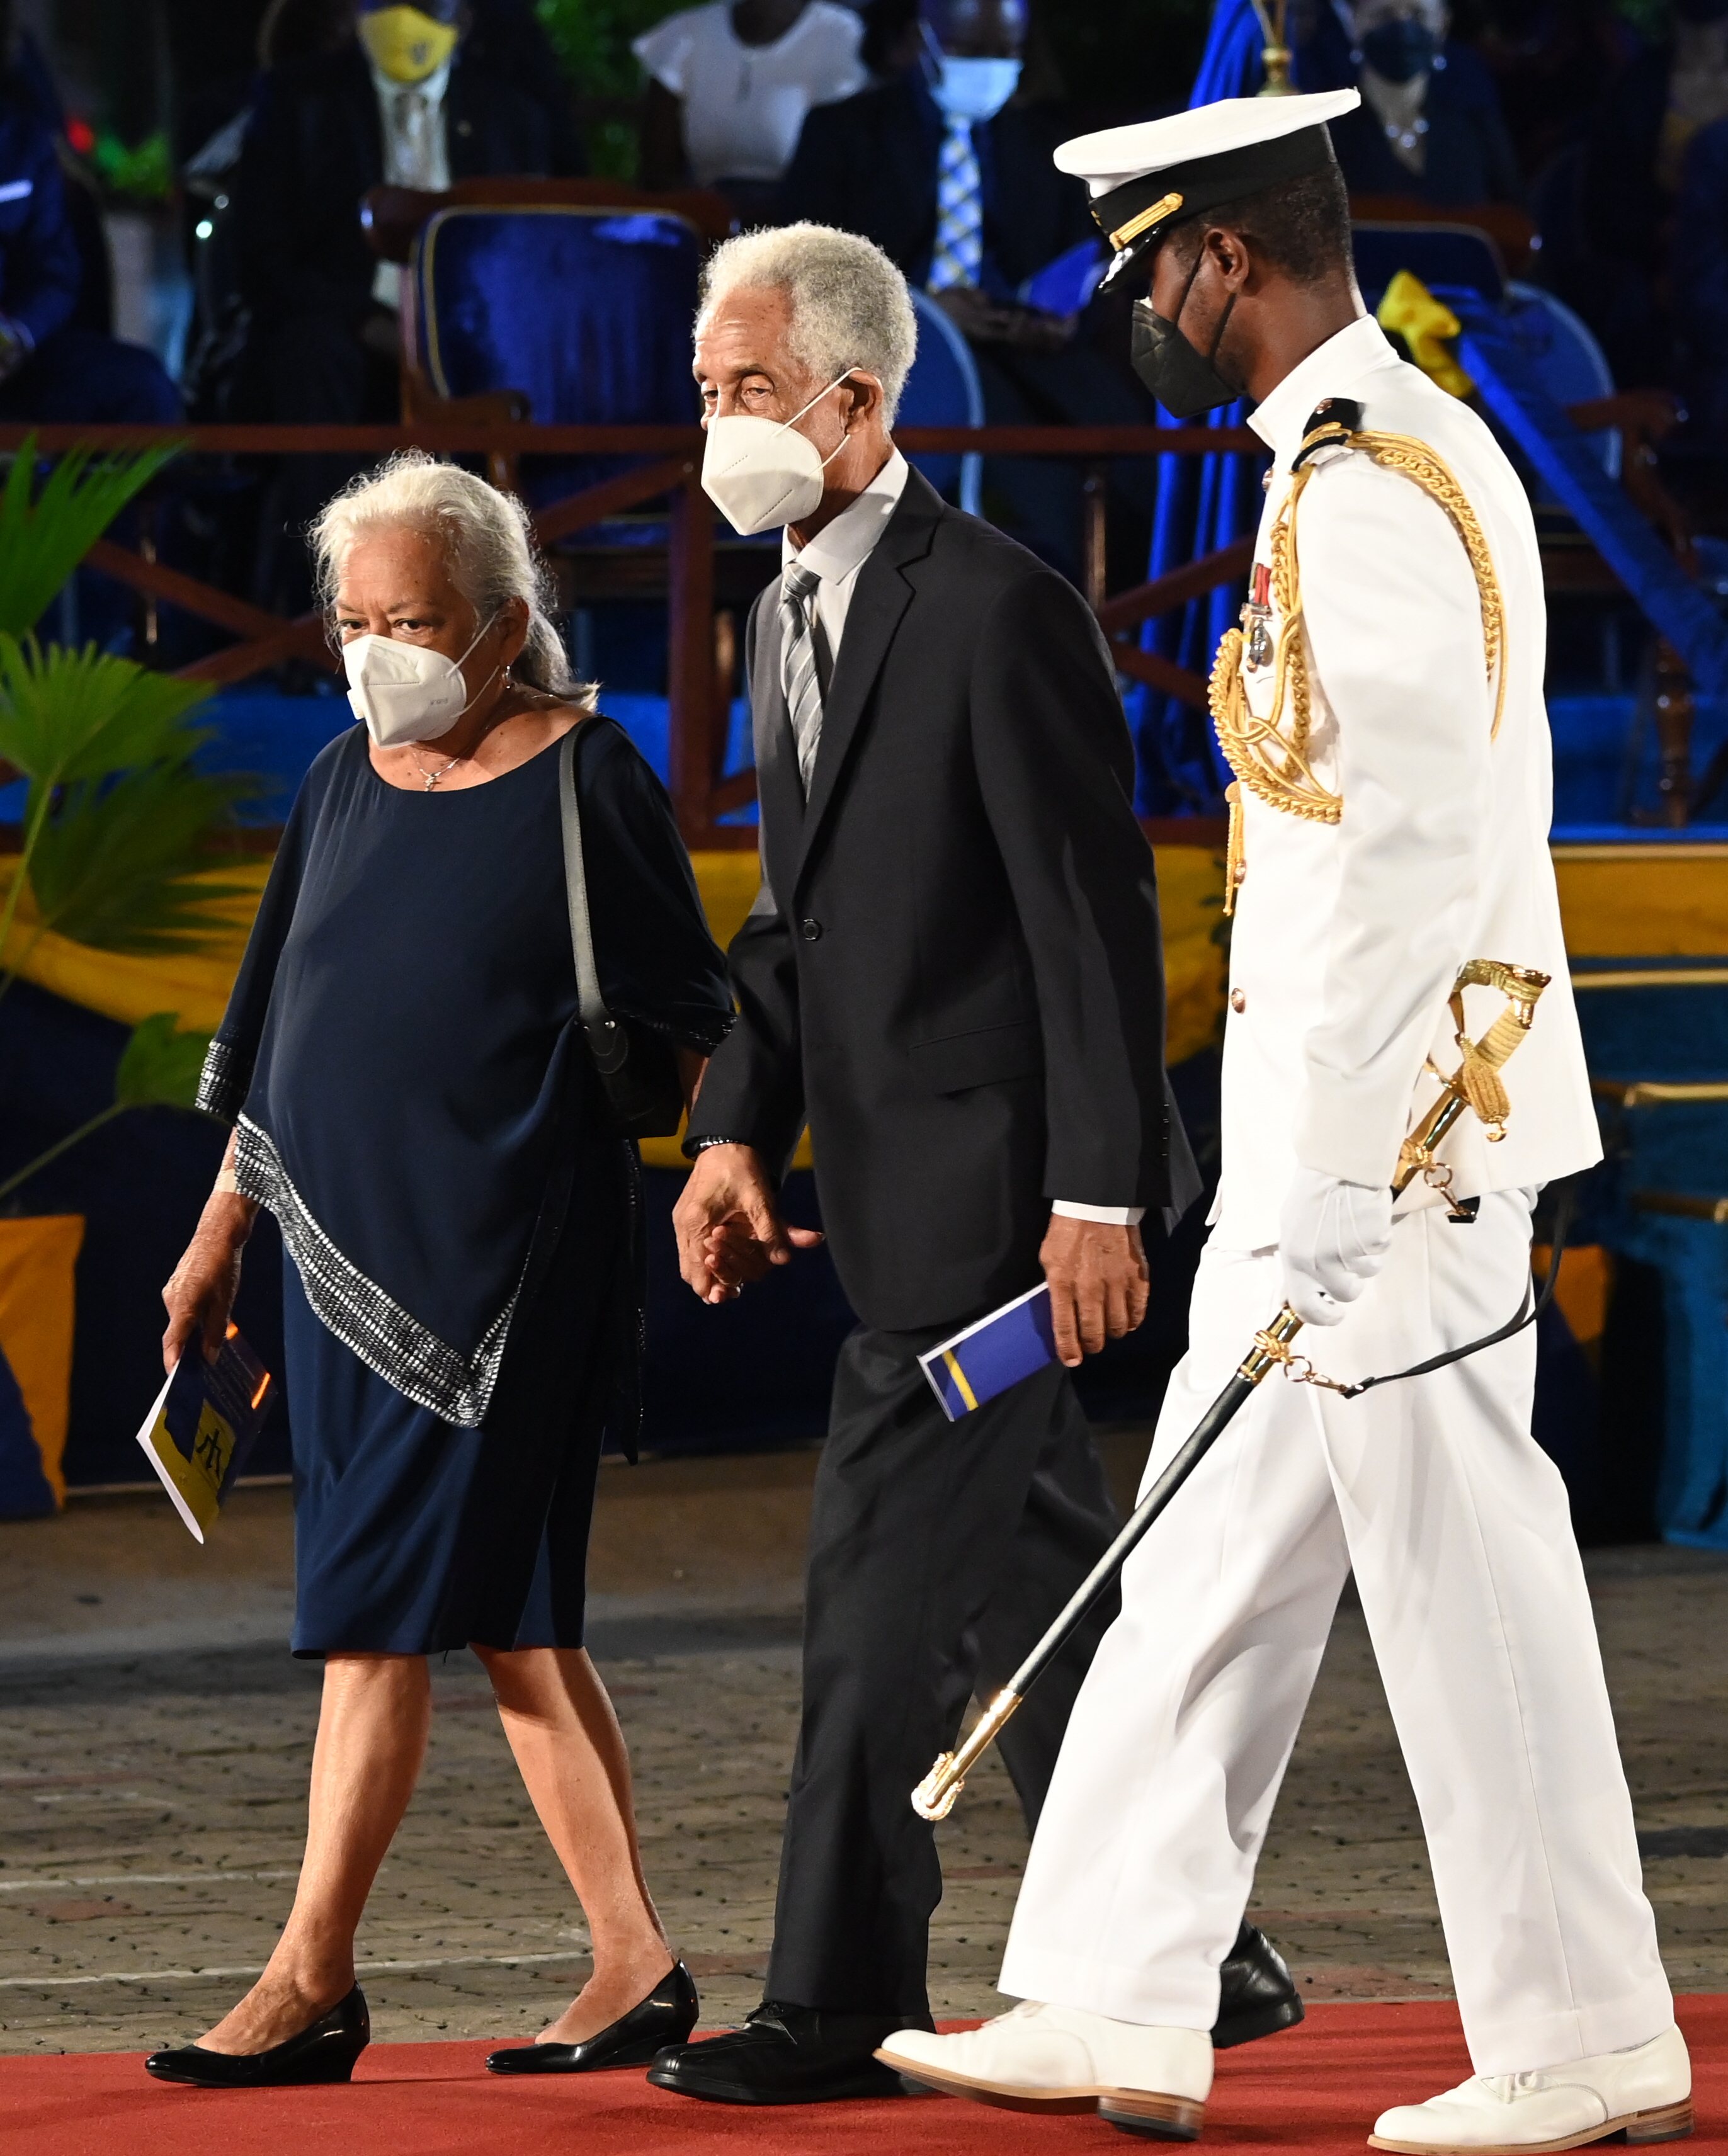 Declaration of the Republic and Barbados Presidential Inauguration Ceremony